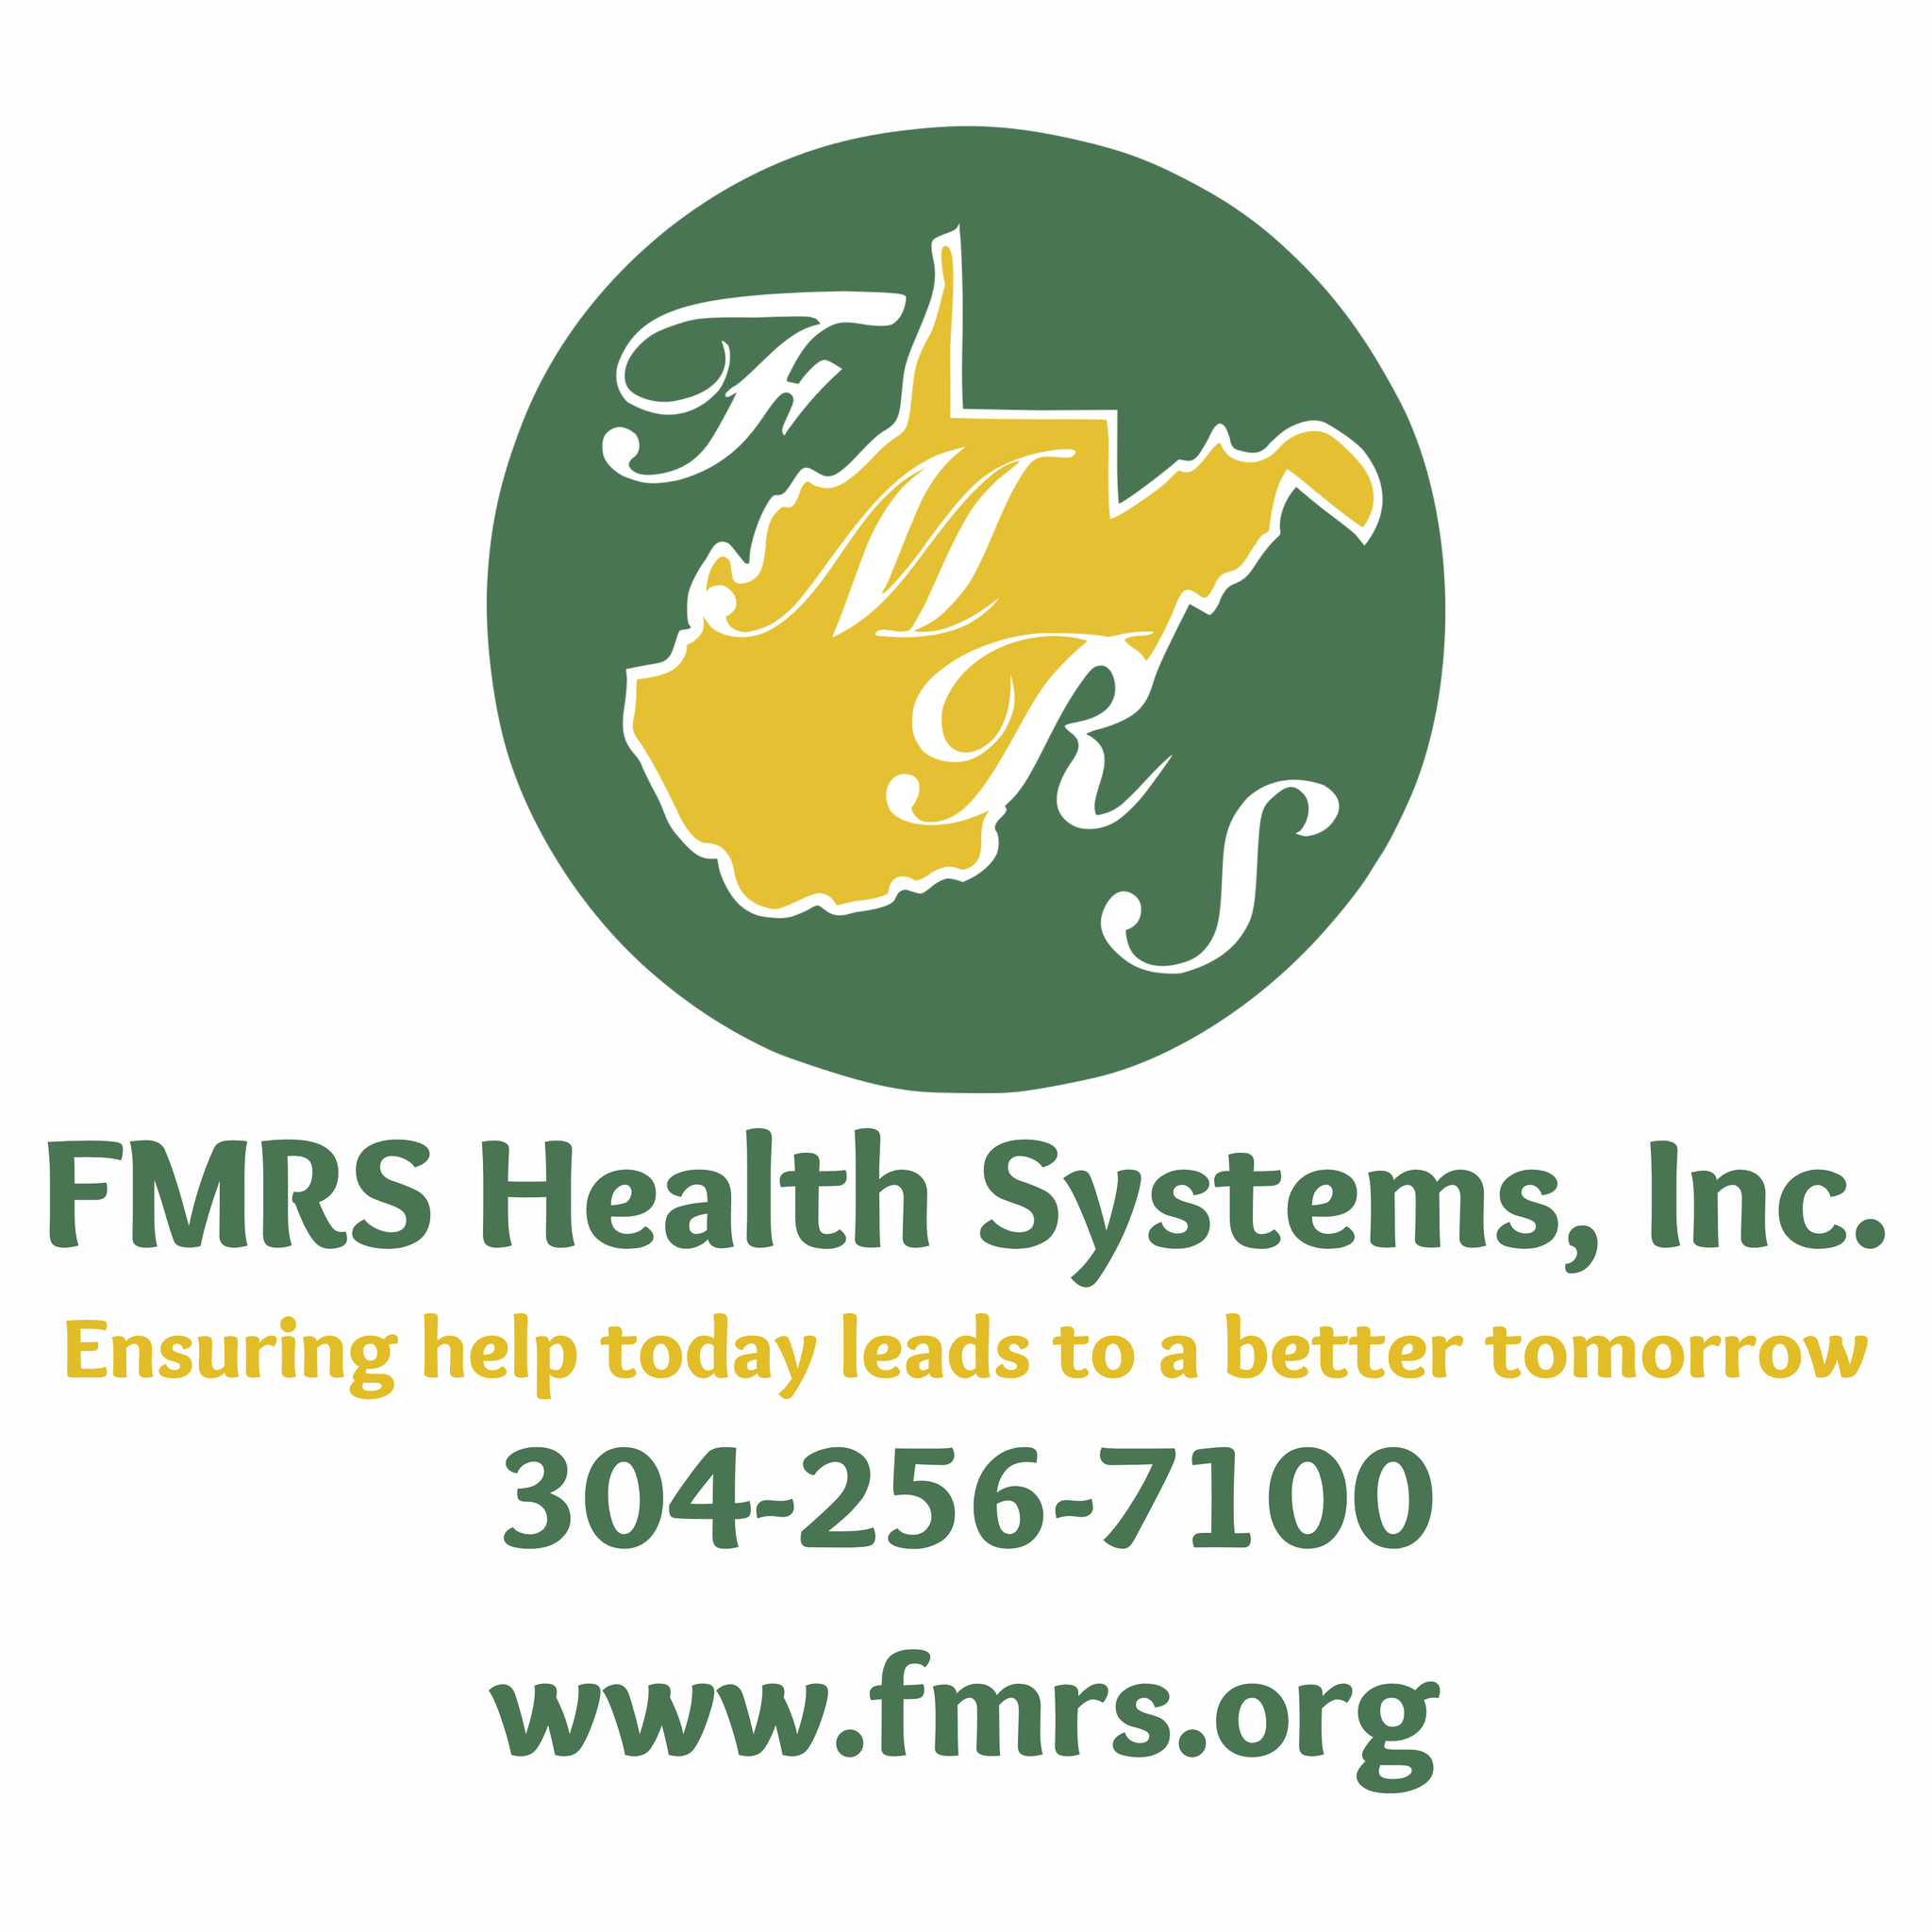 FMRS Health Systems Inc